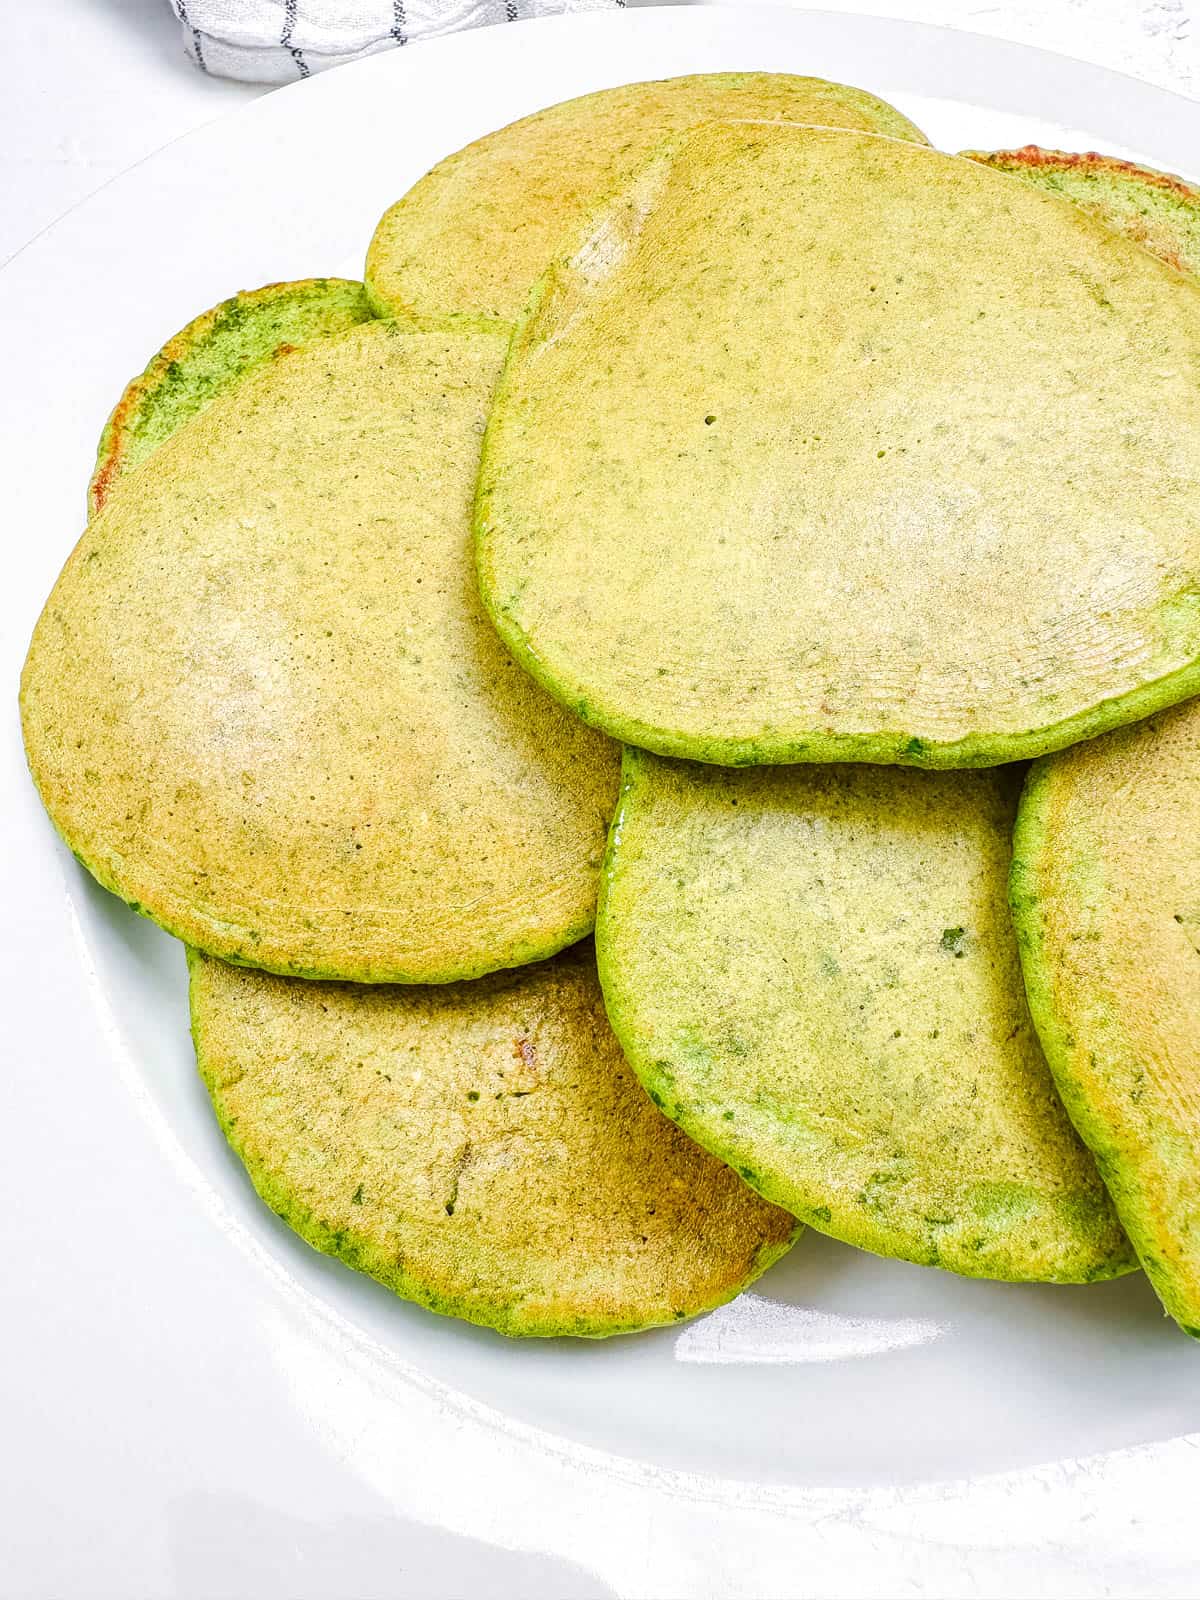 Hulk pancakes stacked on a white plate.